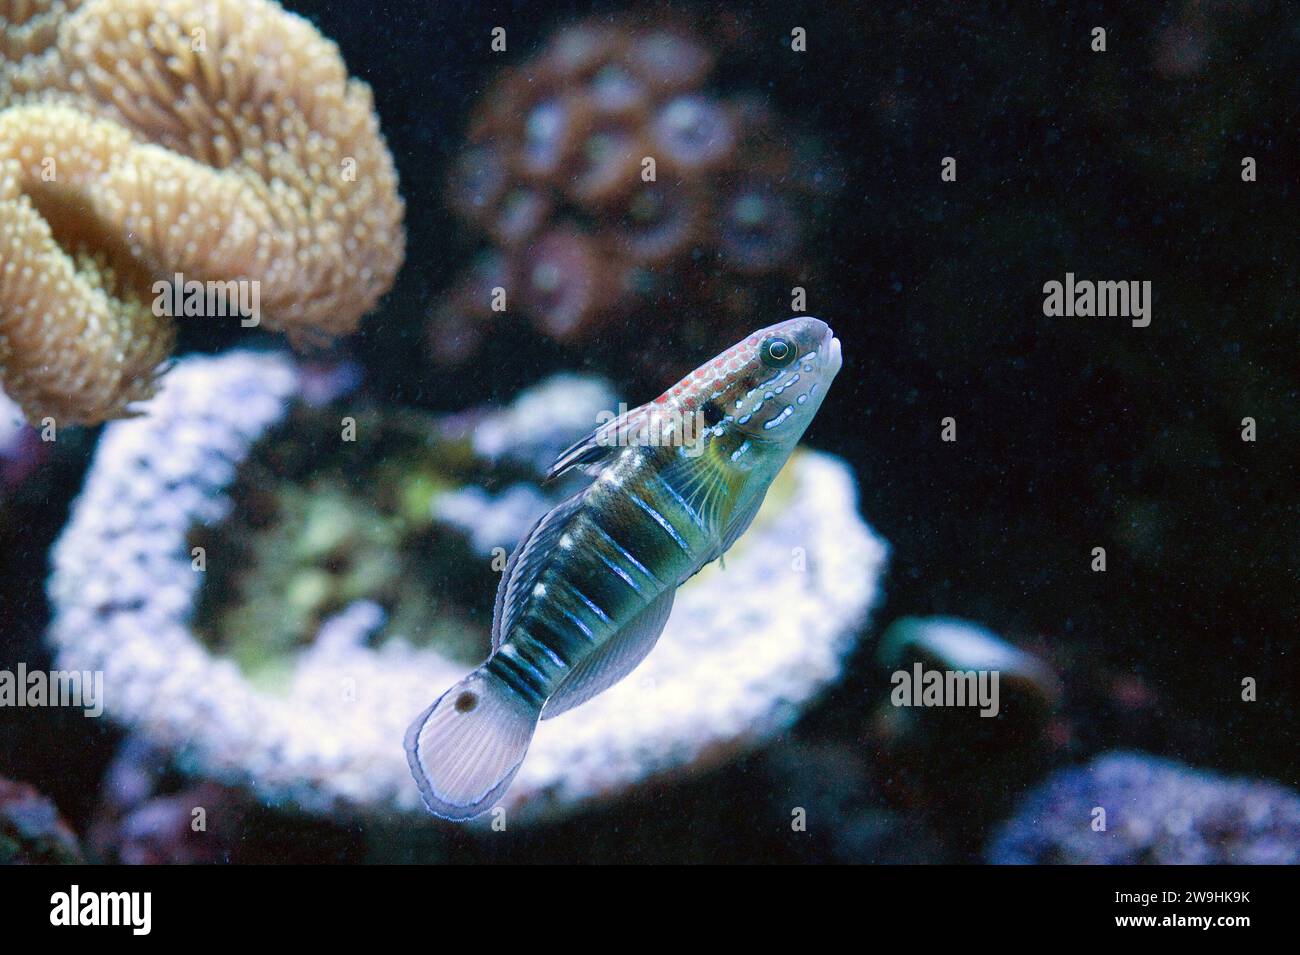 Sleeper banded goby (Amblygobius phalaena) is a marine fish native to tropical Indo-Pacific Ocean. Stock Photo